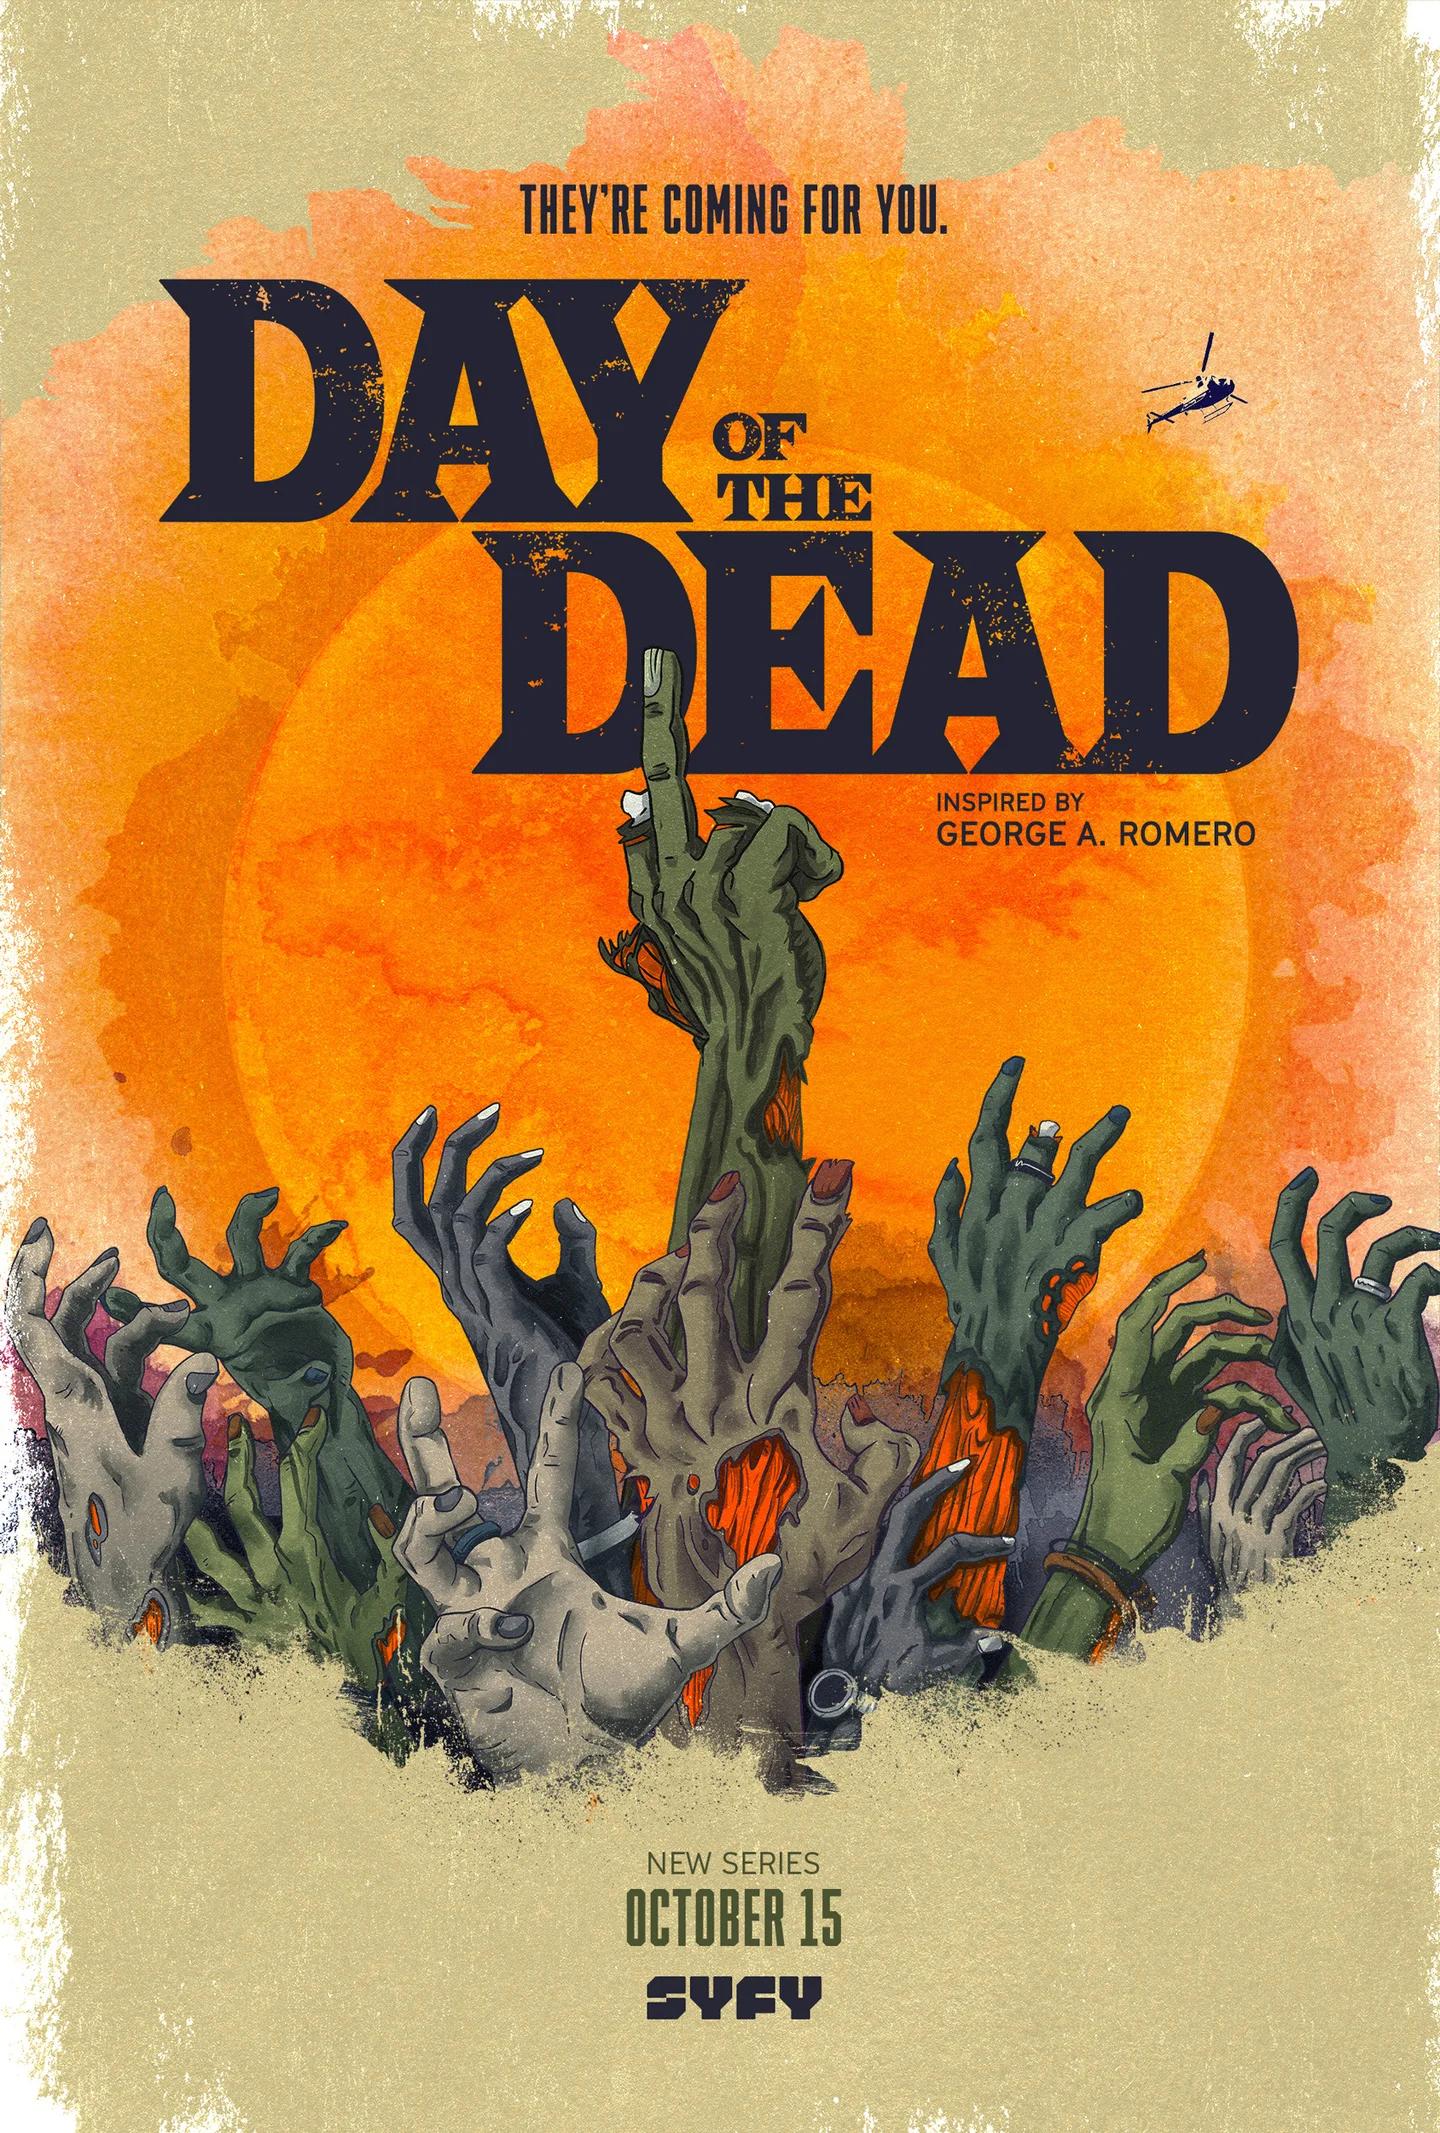   - Day of the Dead